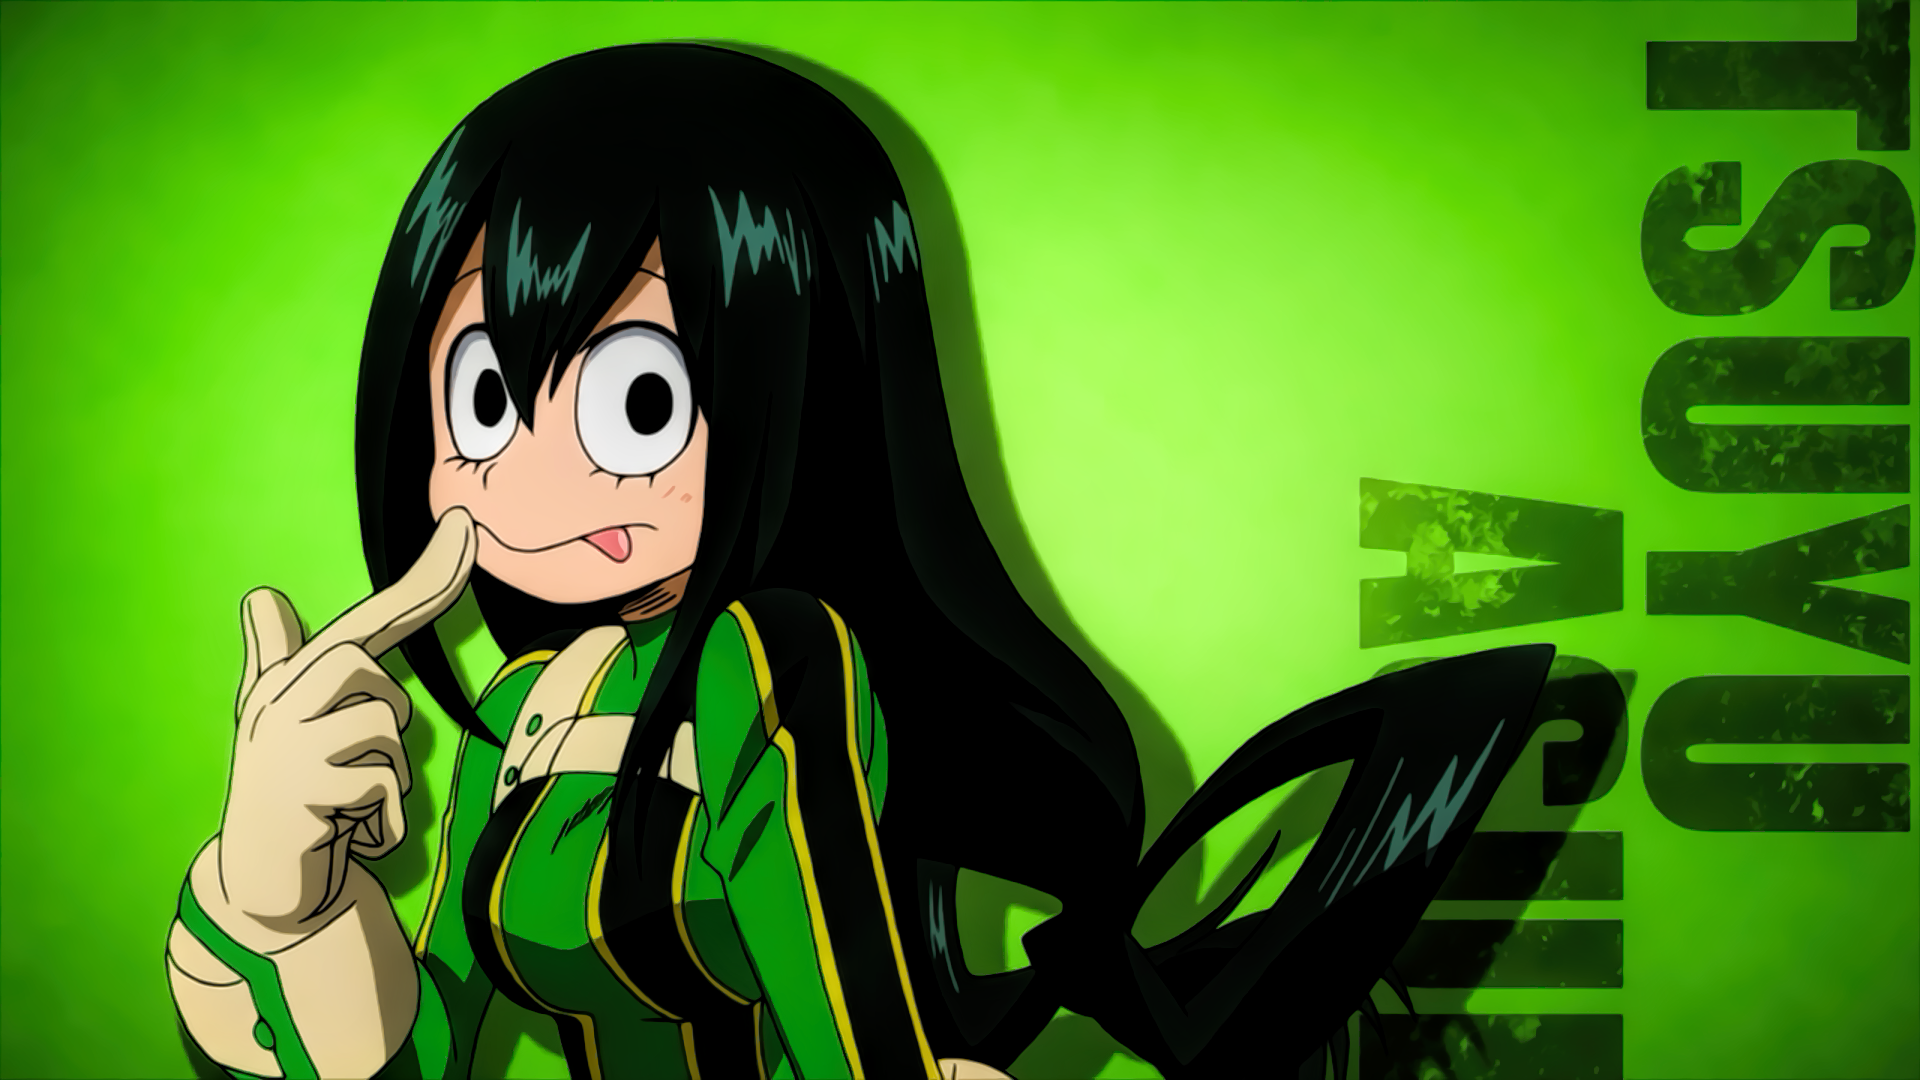 Boku No hero or My Hero Academia is a series with non stop.